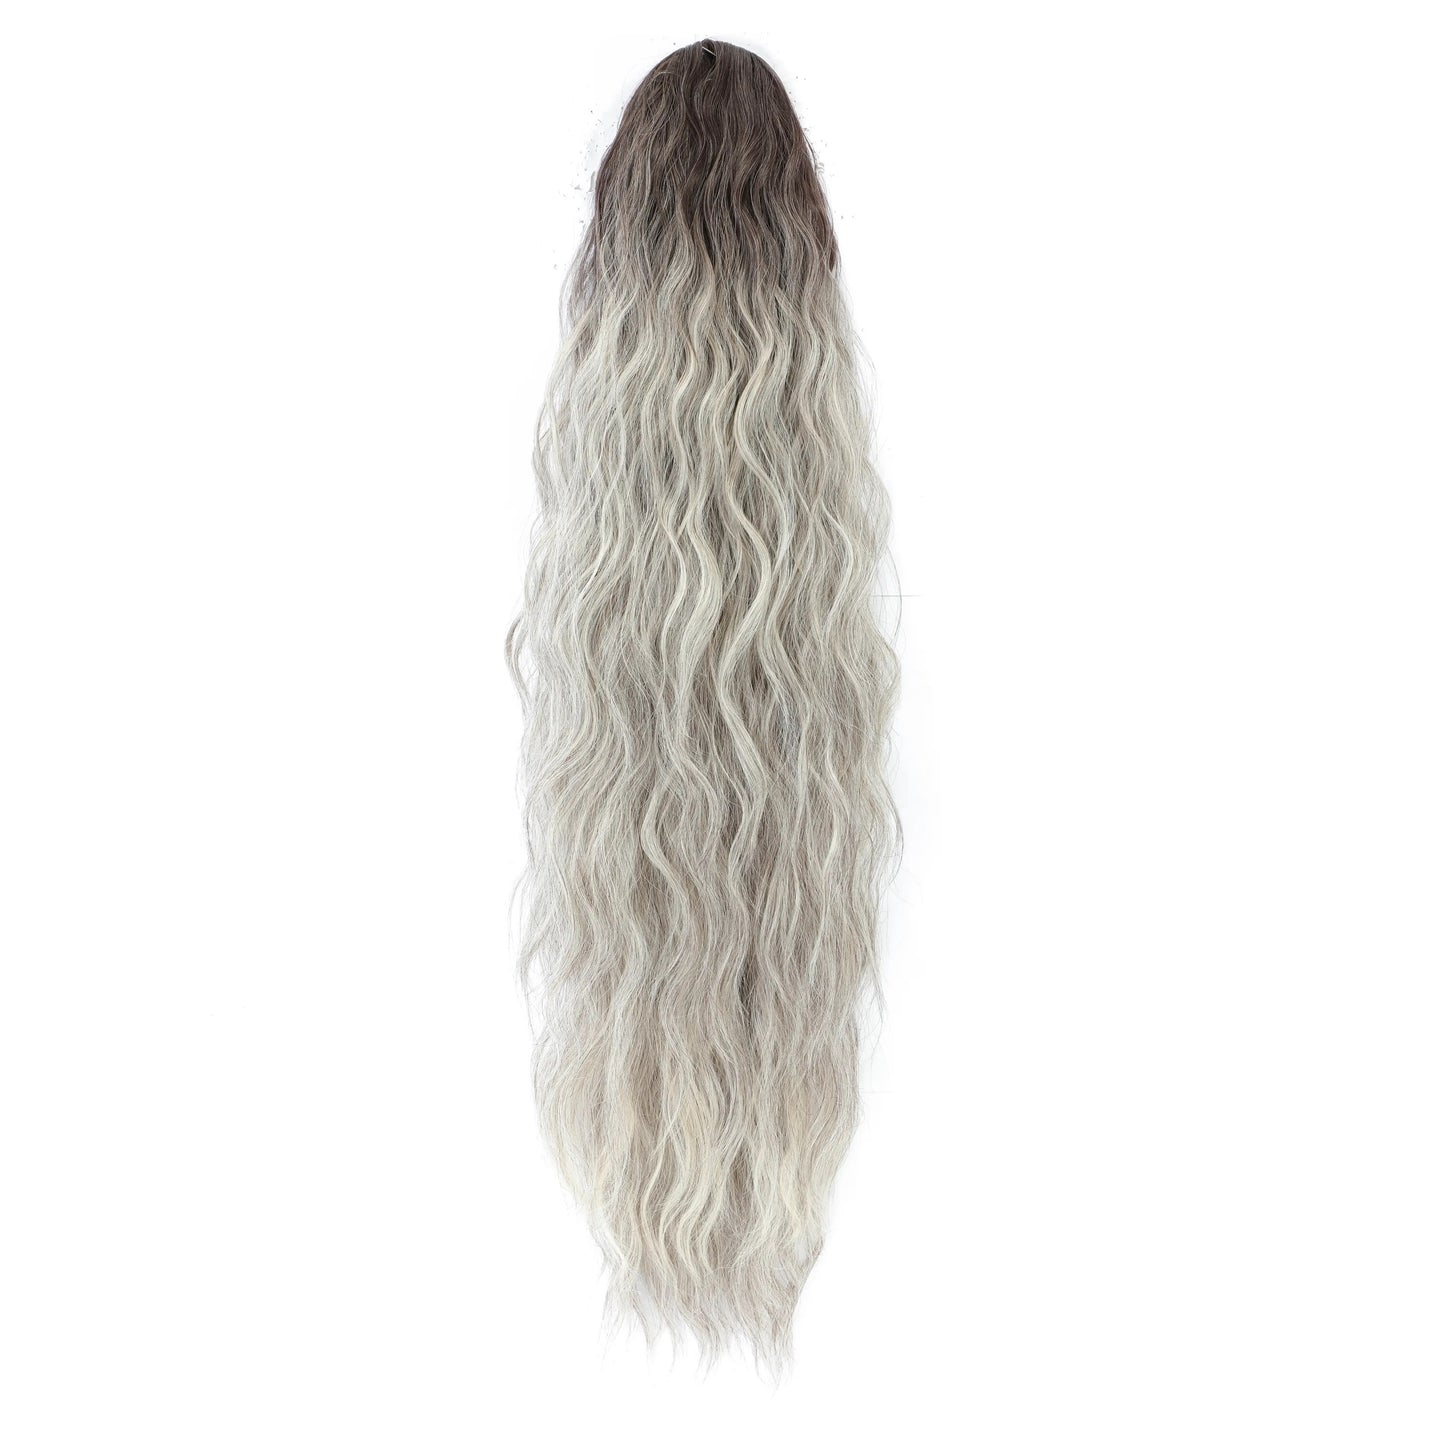 TEEK - Water Wave Ponytail  theteekdotcom Ombre Grey 26inches-65cm 